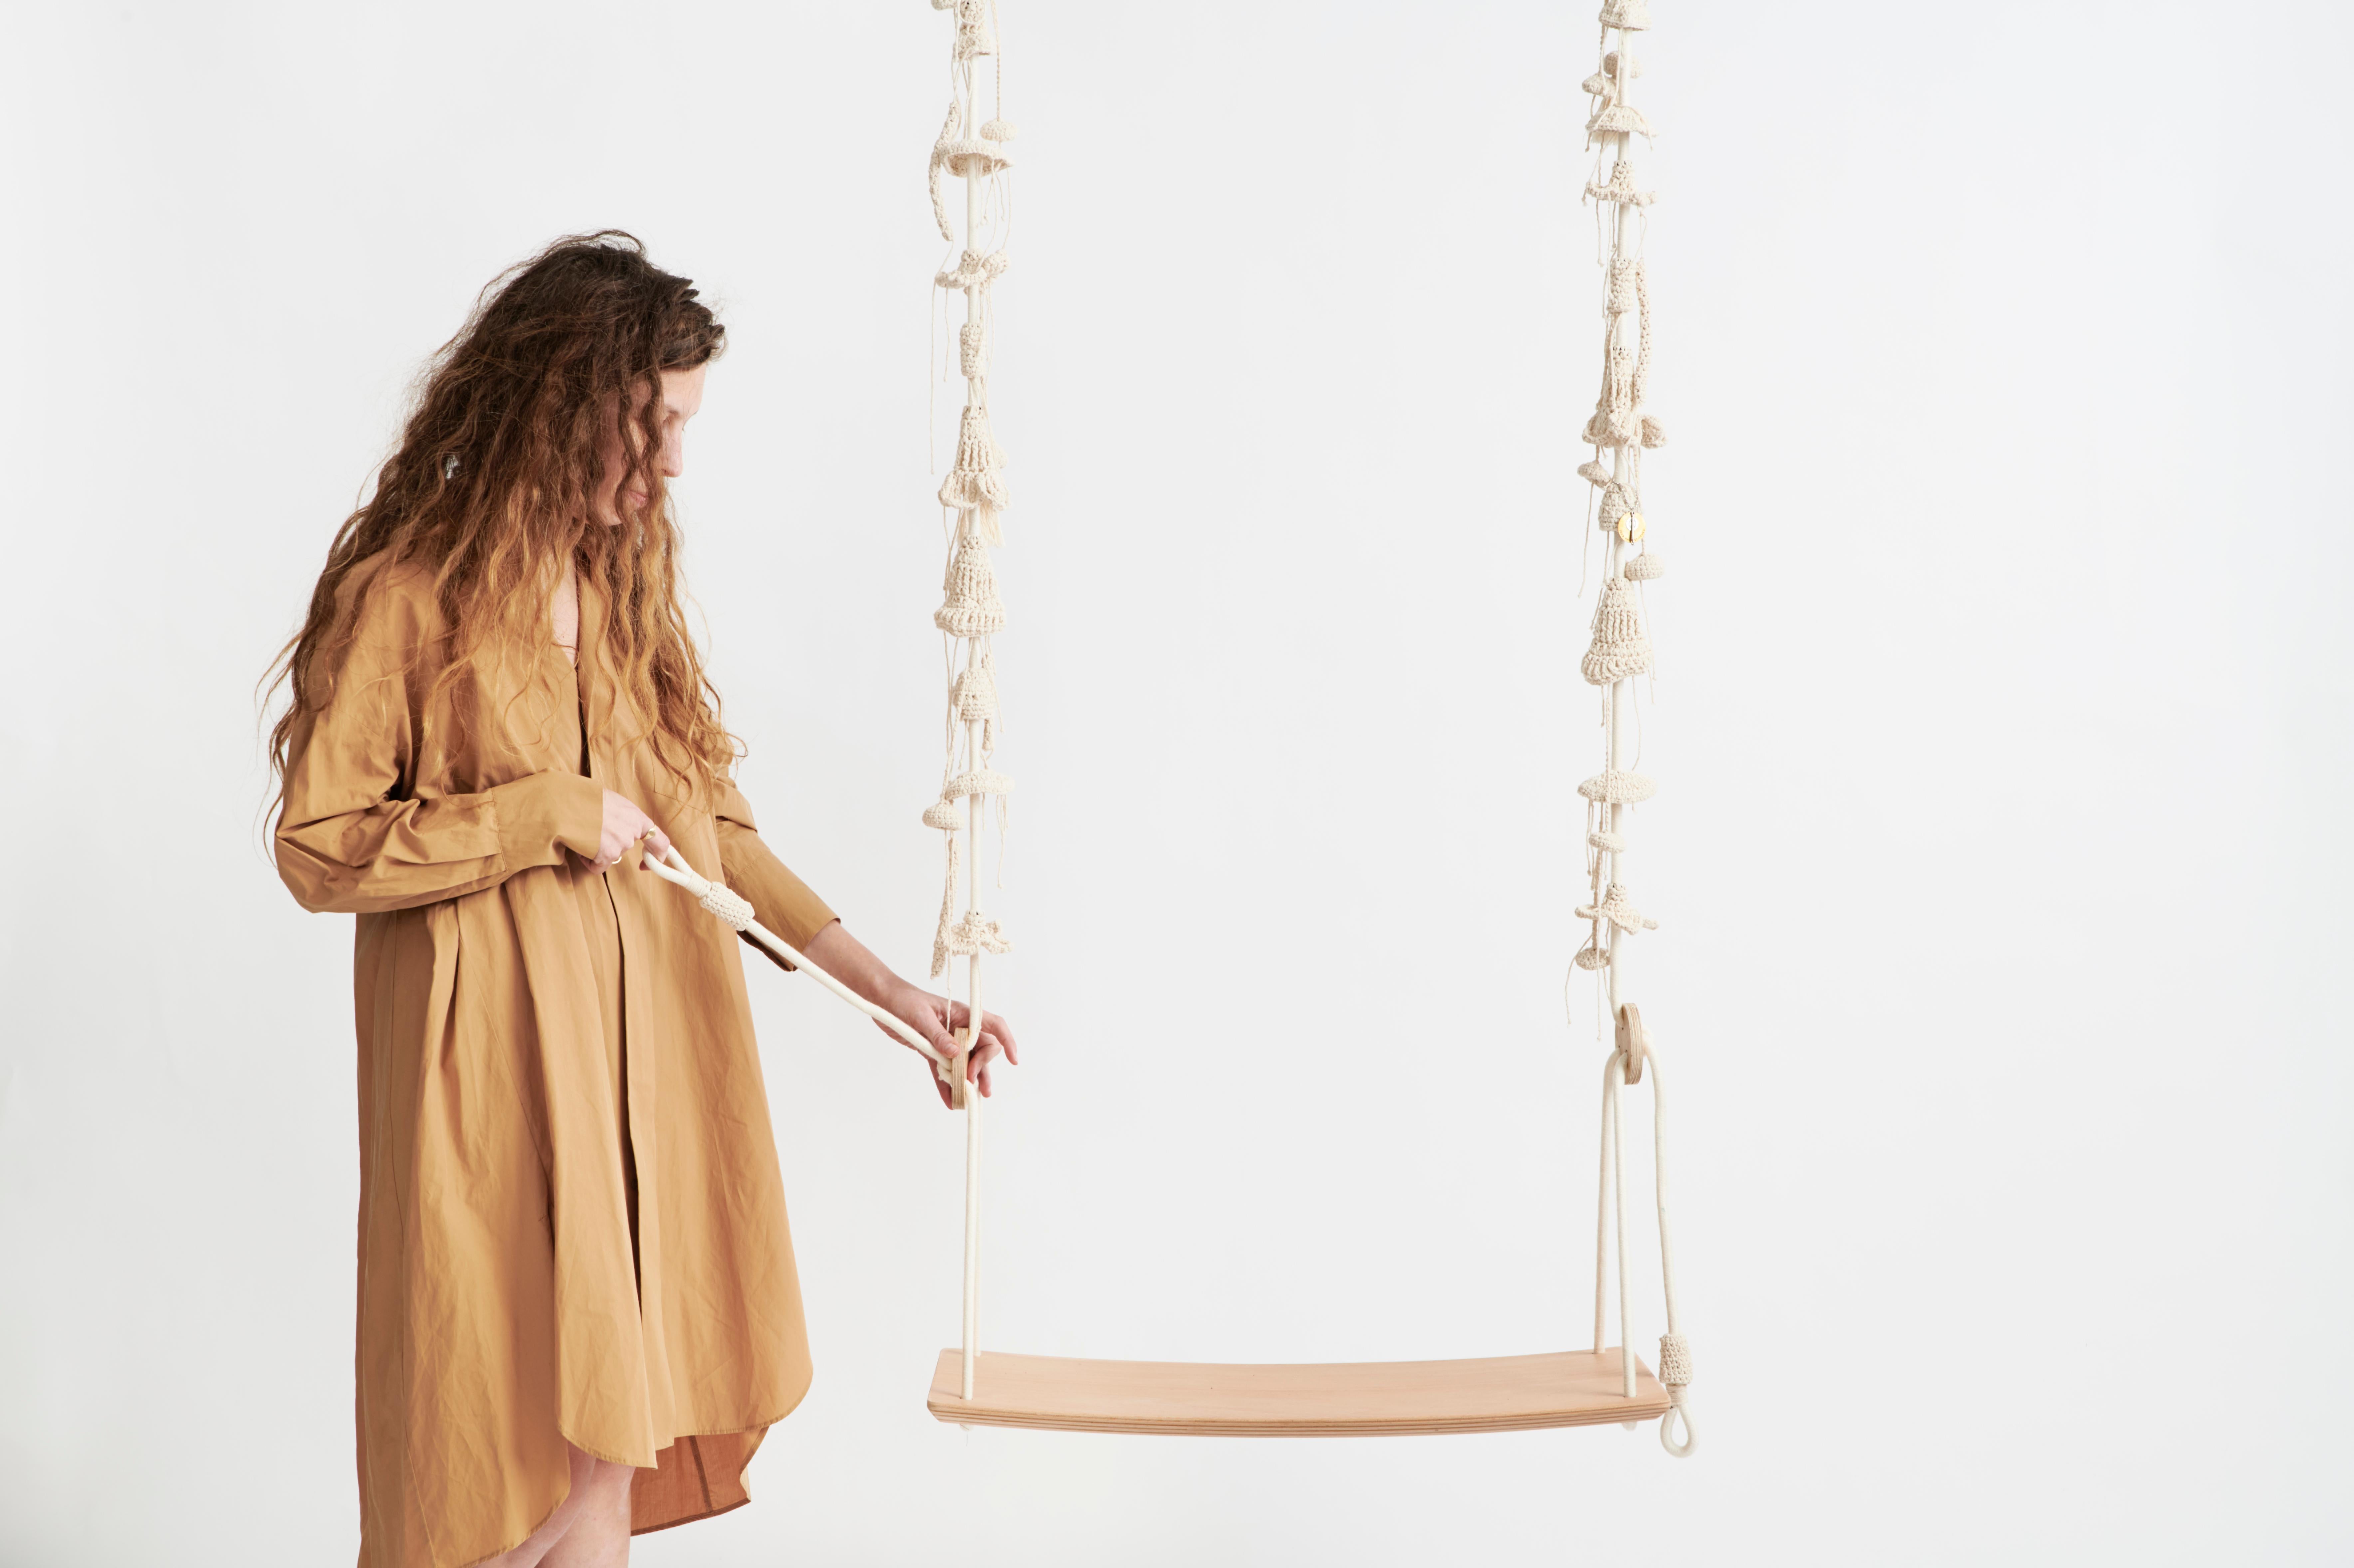 iota swings take the user to a wild, natural, fantastic place. These swings work great in living rooms, spacious bedrooms or hotel lobbies and suites. They are an elegant yet bold choice for both modern-minimalist and boho interiors. Nearly 100